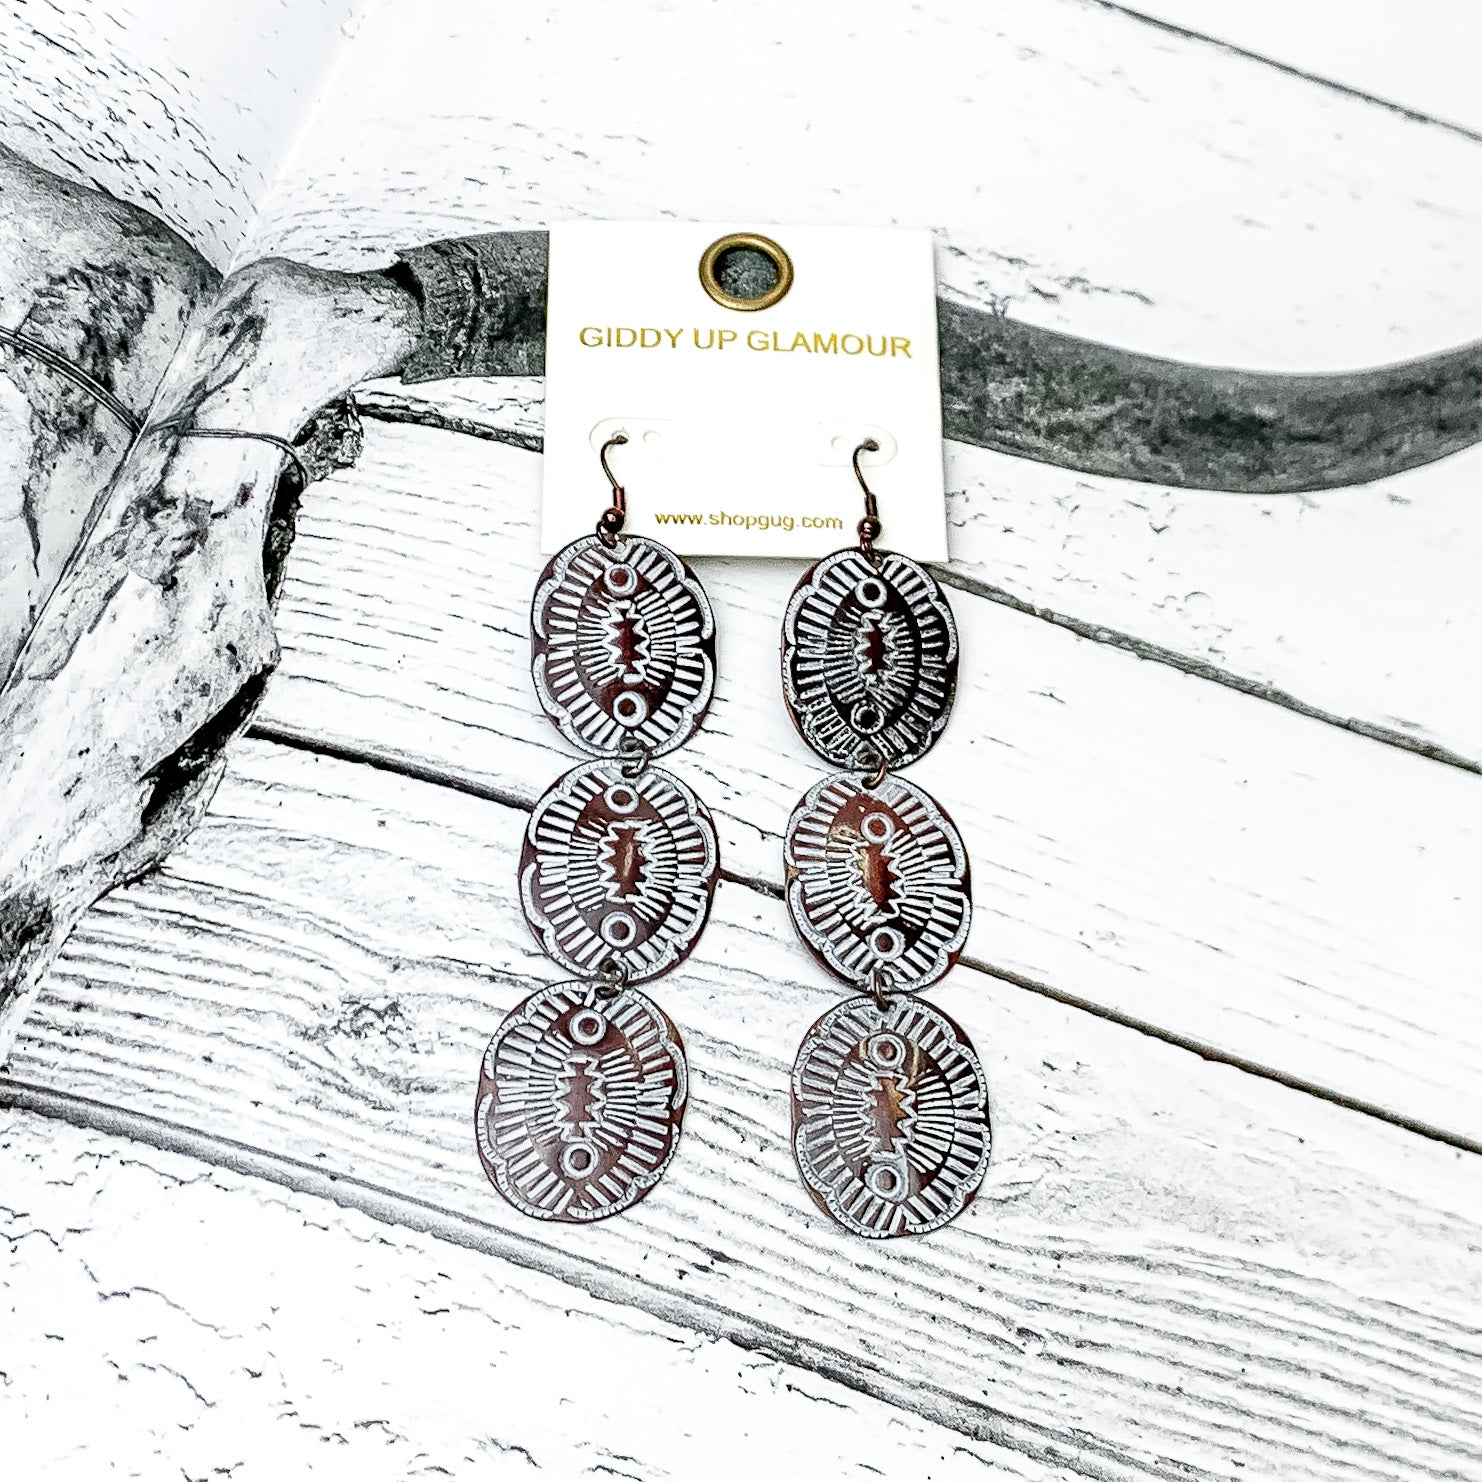 Three Tier Copper Tone Oval Earrings With White Designs. Pictured on a western page of a book with wood and a longhorn.